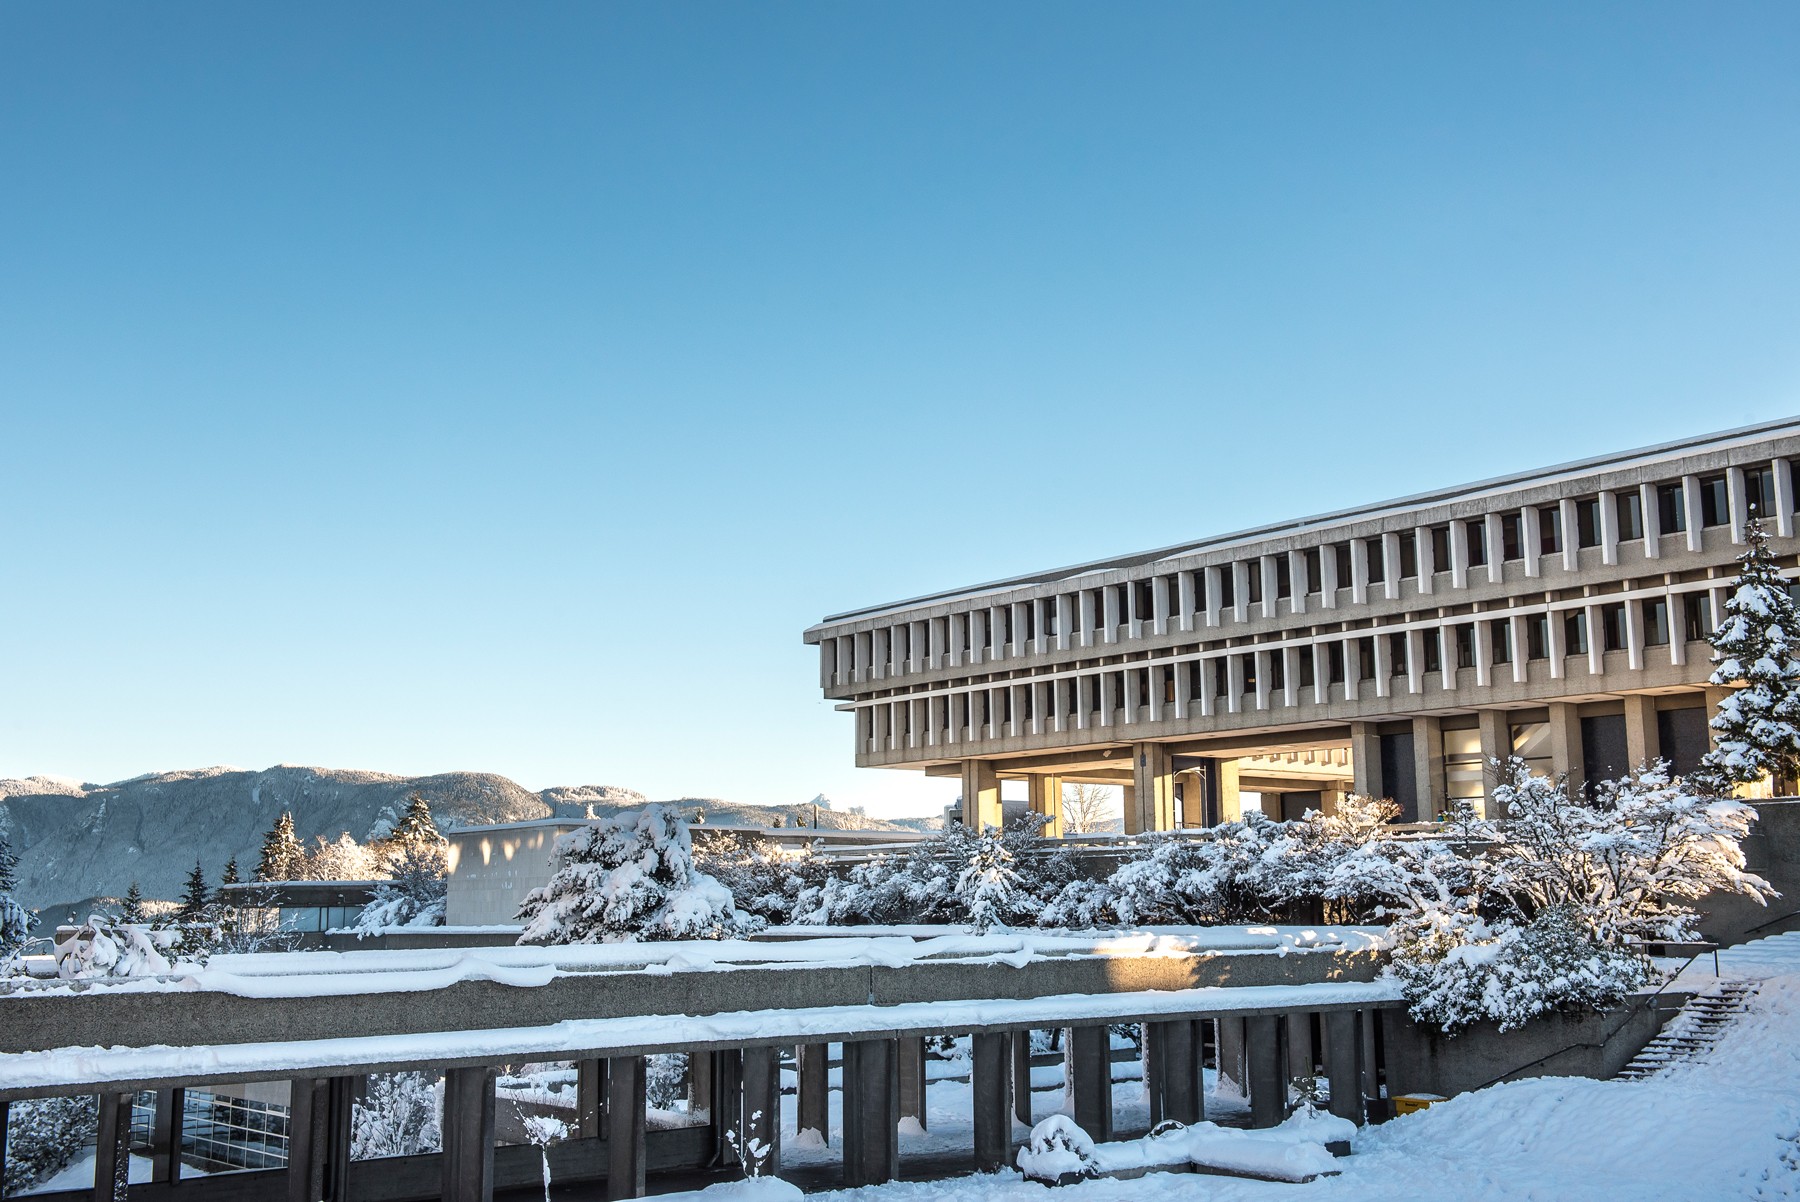 An image of SFU's Burnaby Campus AQ, with trees and roof blanketed in snow.